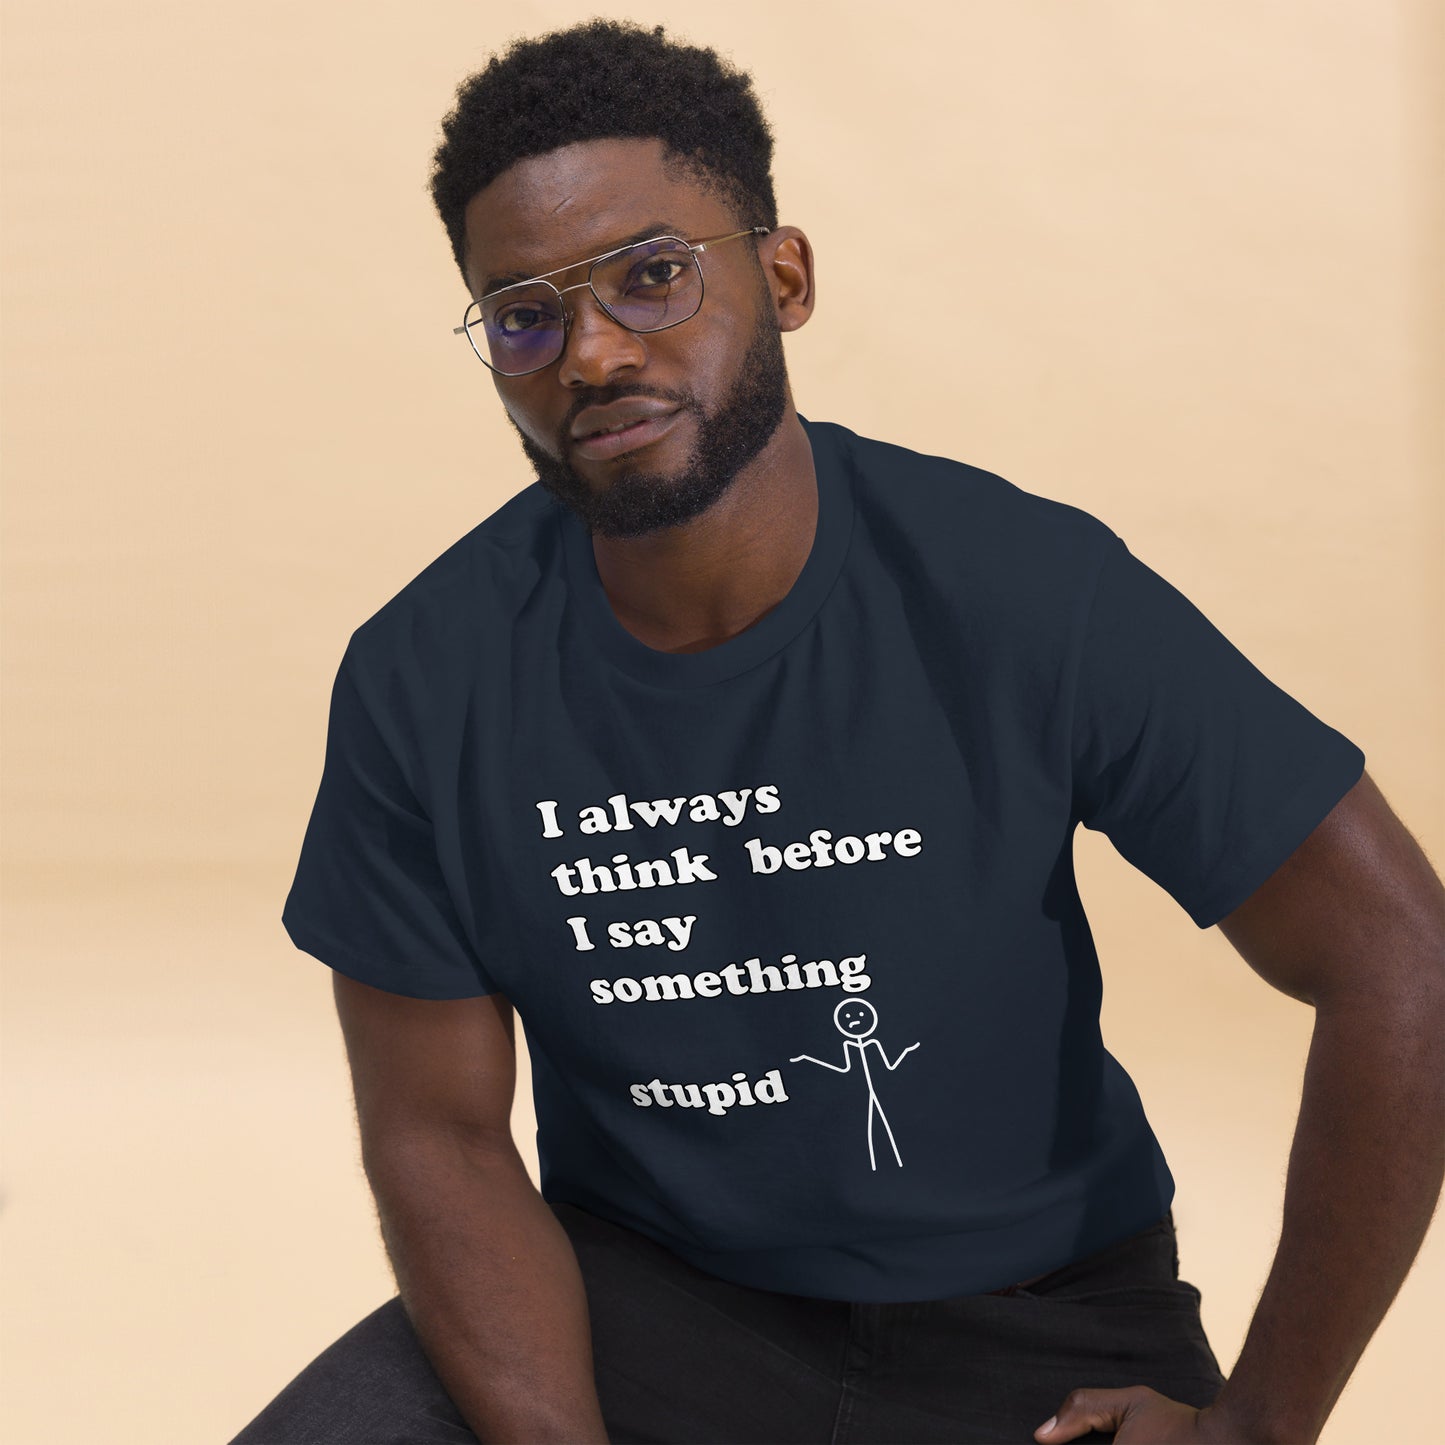 Man with navy blue t-shirt with text "I always think before I say something stupid"